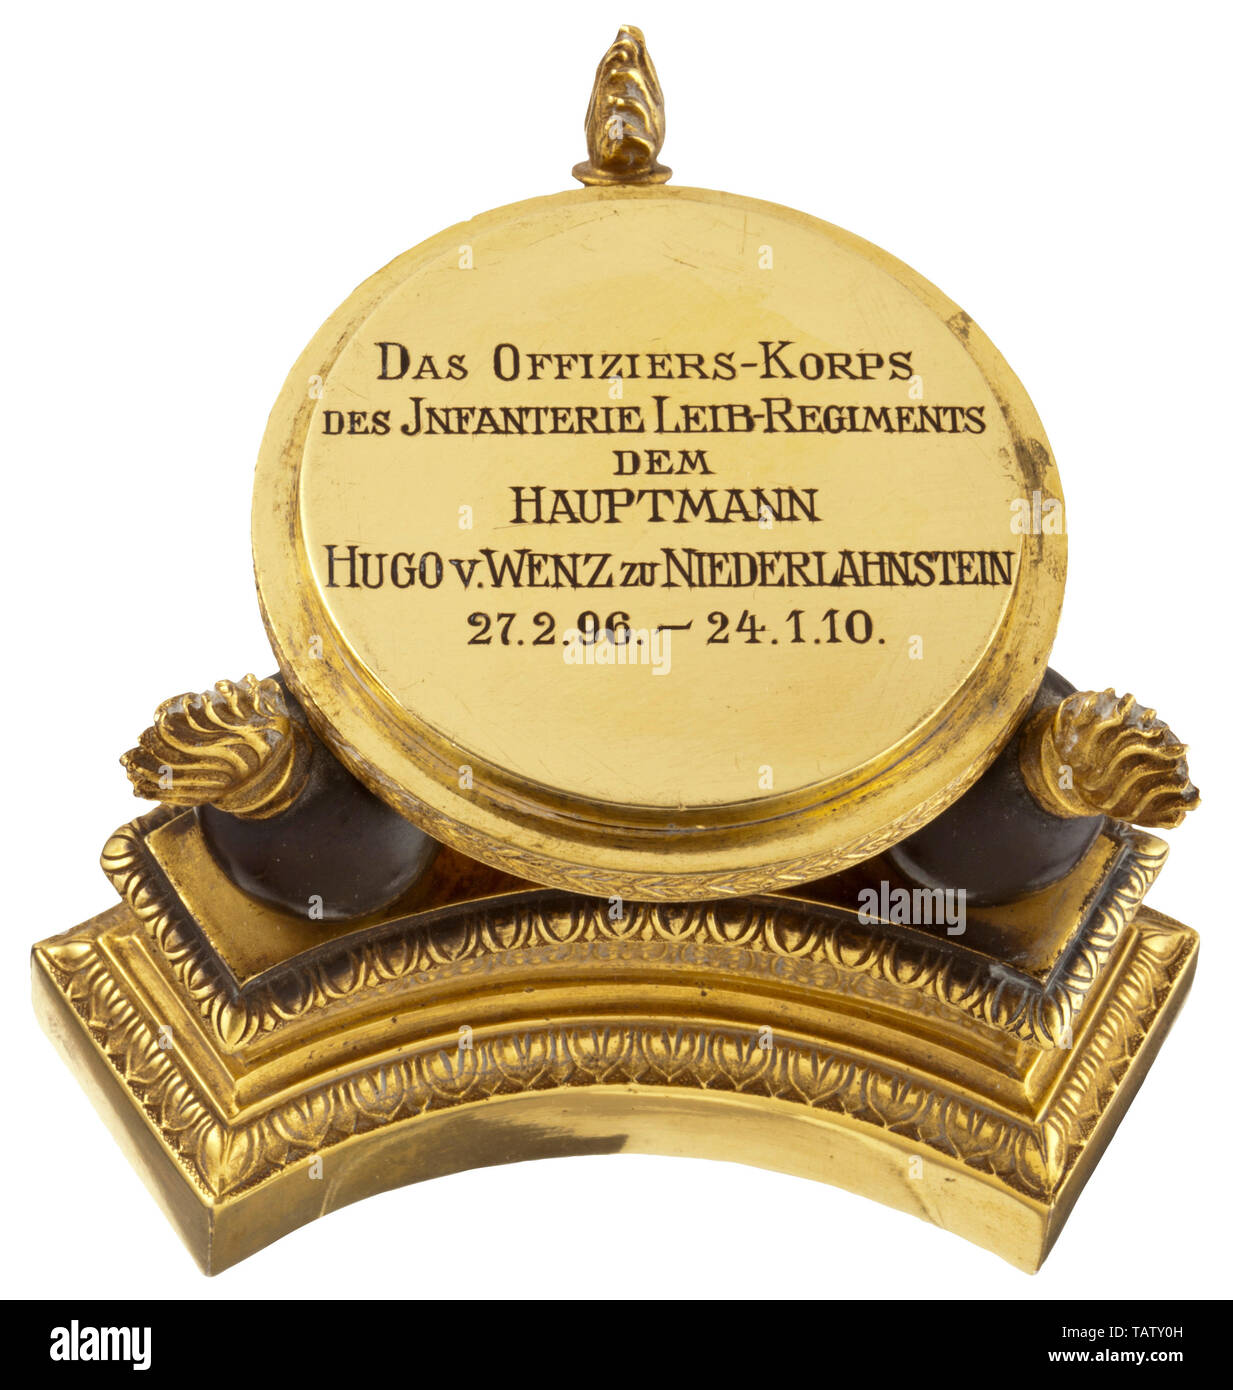 Generalmajor Hugo von Wenz zu Niederlahnstein - an officer's gift presented by the Infantry Lifeguards Regiment 1910, The dedication plaque bearing the inscription 'DAS OFFIZIERS-KORPS DES INFANTERIE LEIB-REGIMENTS DEM HAUPTMANN HUGO V. WENZ ZU NIEDERLAHNSTEIN 27.2.96. - 24.1.10' is supported by three grenades mounted in dark-coloured bronze and fitted on a three-pronged, fire-gilt bronze plinth, engraved with the registration number '63'. On top is the silver drinking cup with a gilt interior, shaped like an officer's grenadier cap from the time, Additional-Rights-Clearance-Info-Not-Available Stock Photo